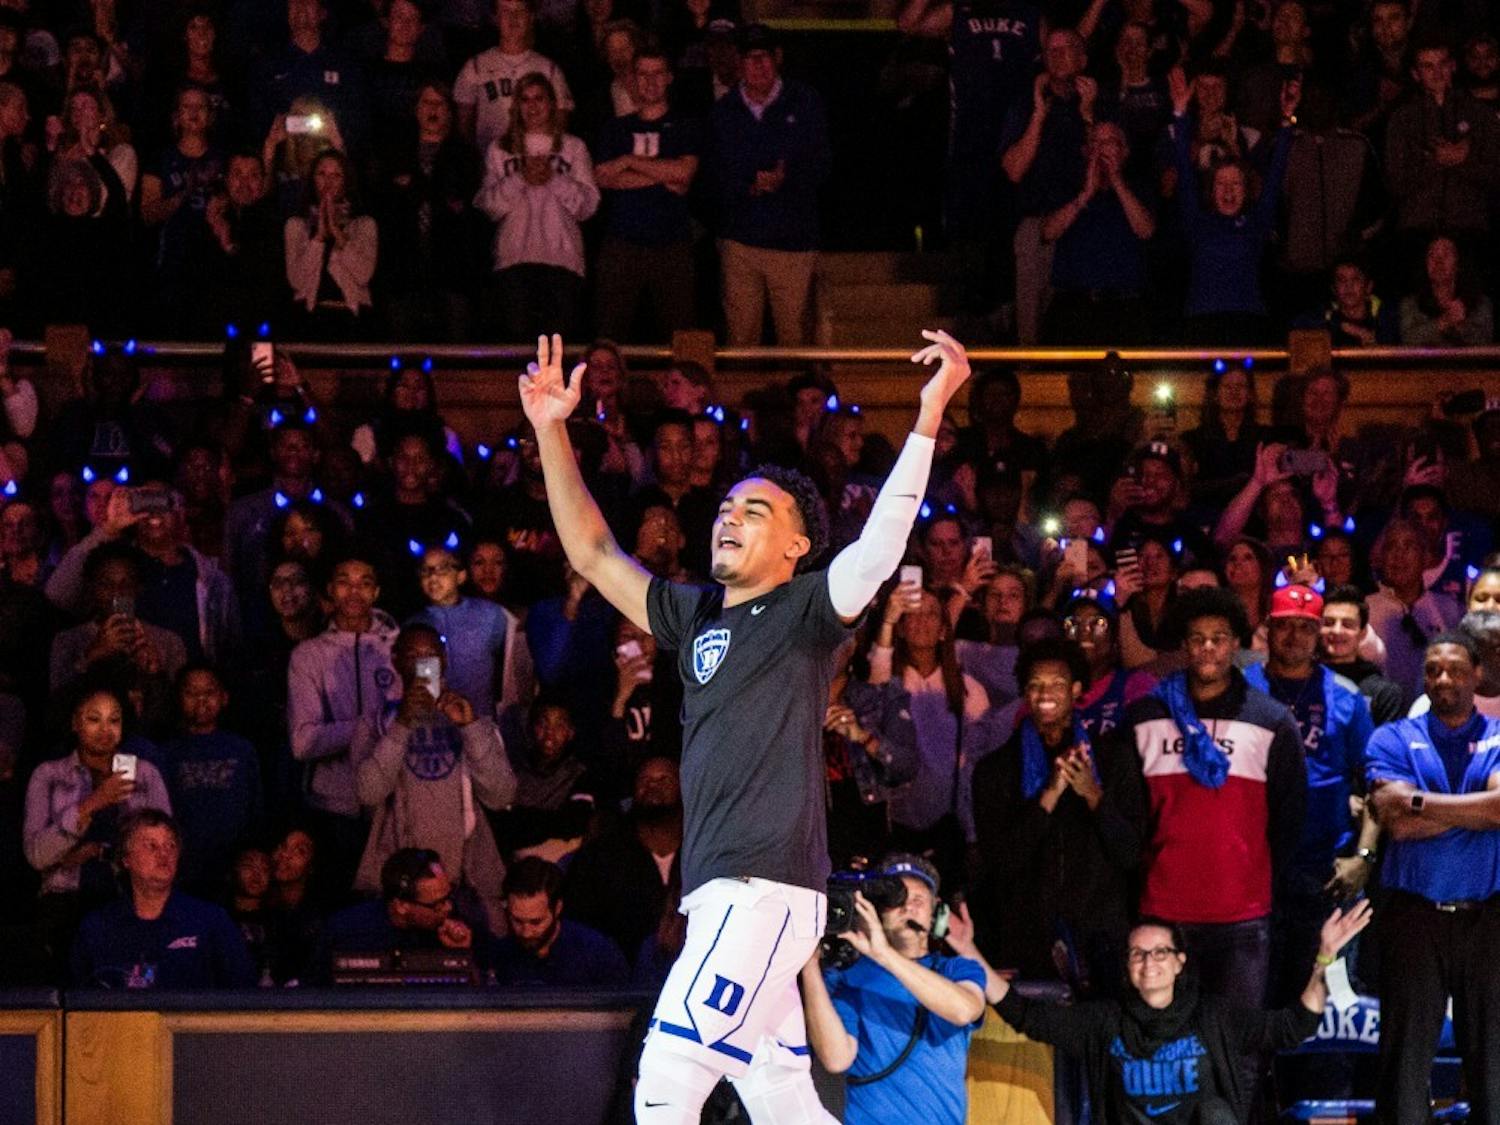 Countdown to Craziness is typically one of the hottest destinations for top men's basketball recruits